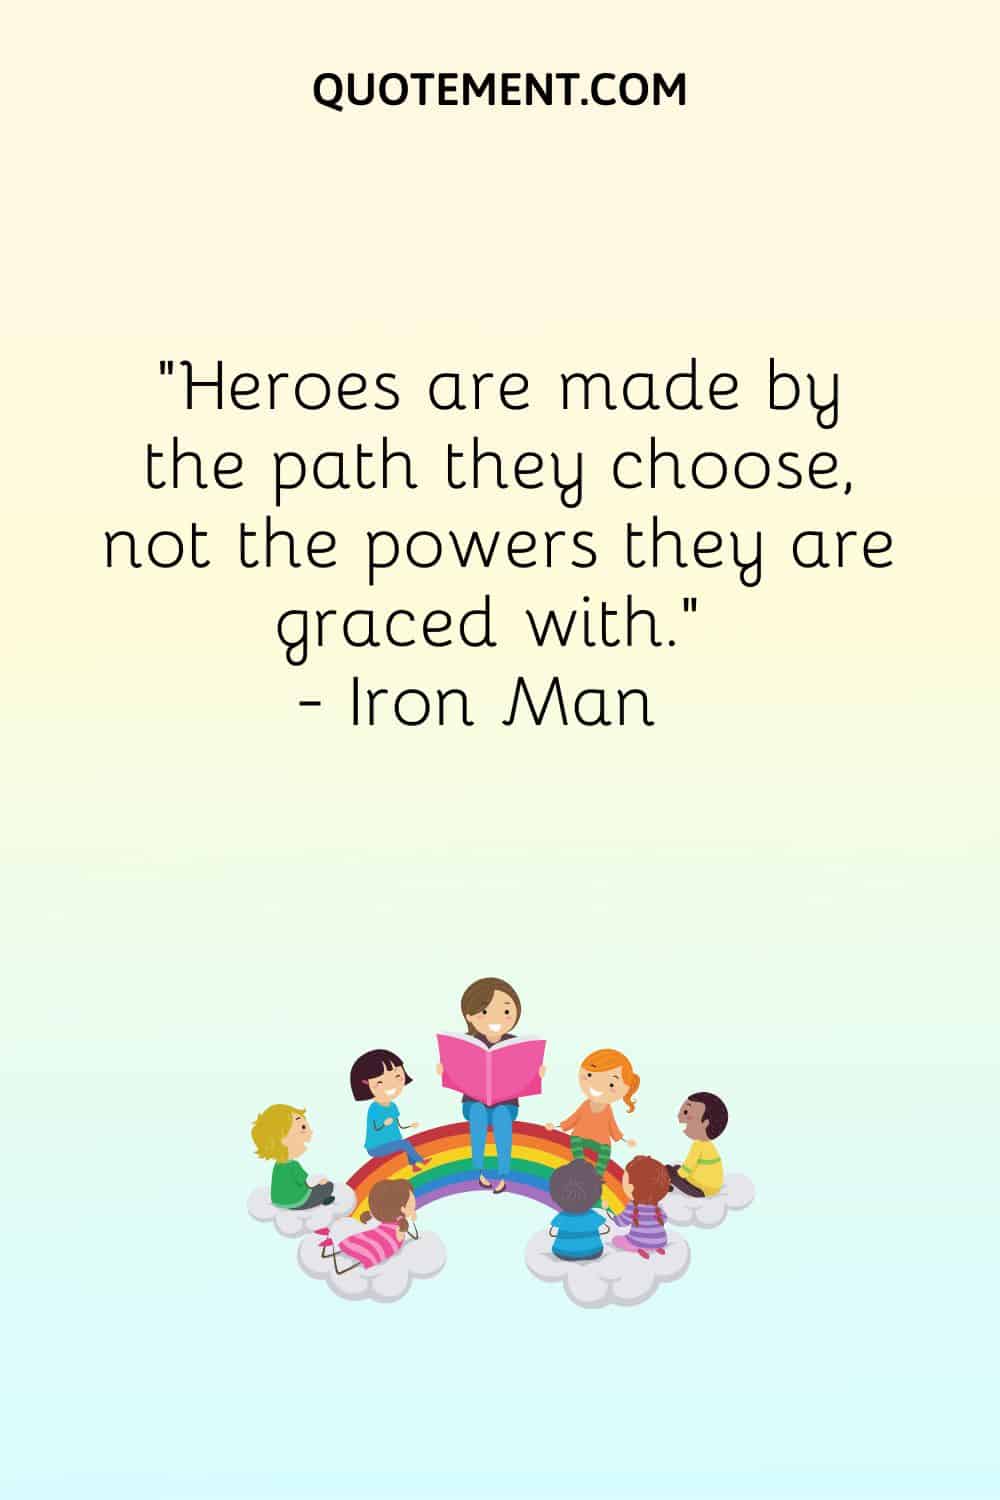 Heroes are made by the path they choose, not the powers they are graced with